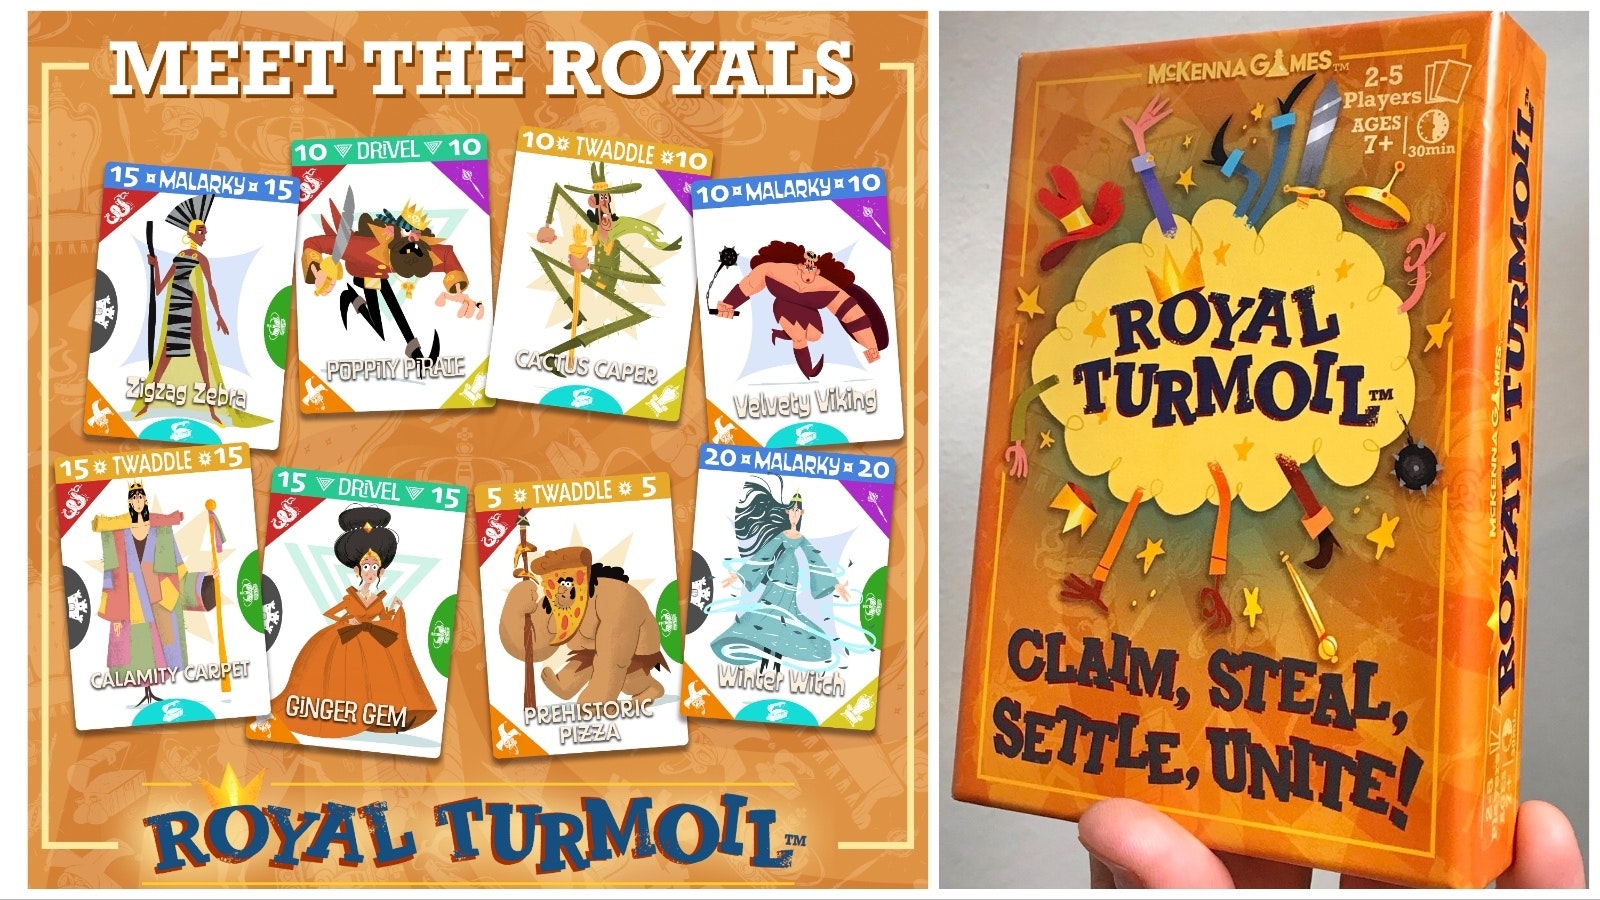 There are eight royals in the game from three different kingdoms in Royal Turmoil, available nationwide.